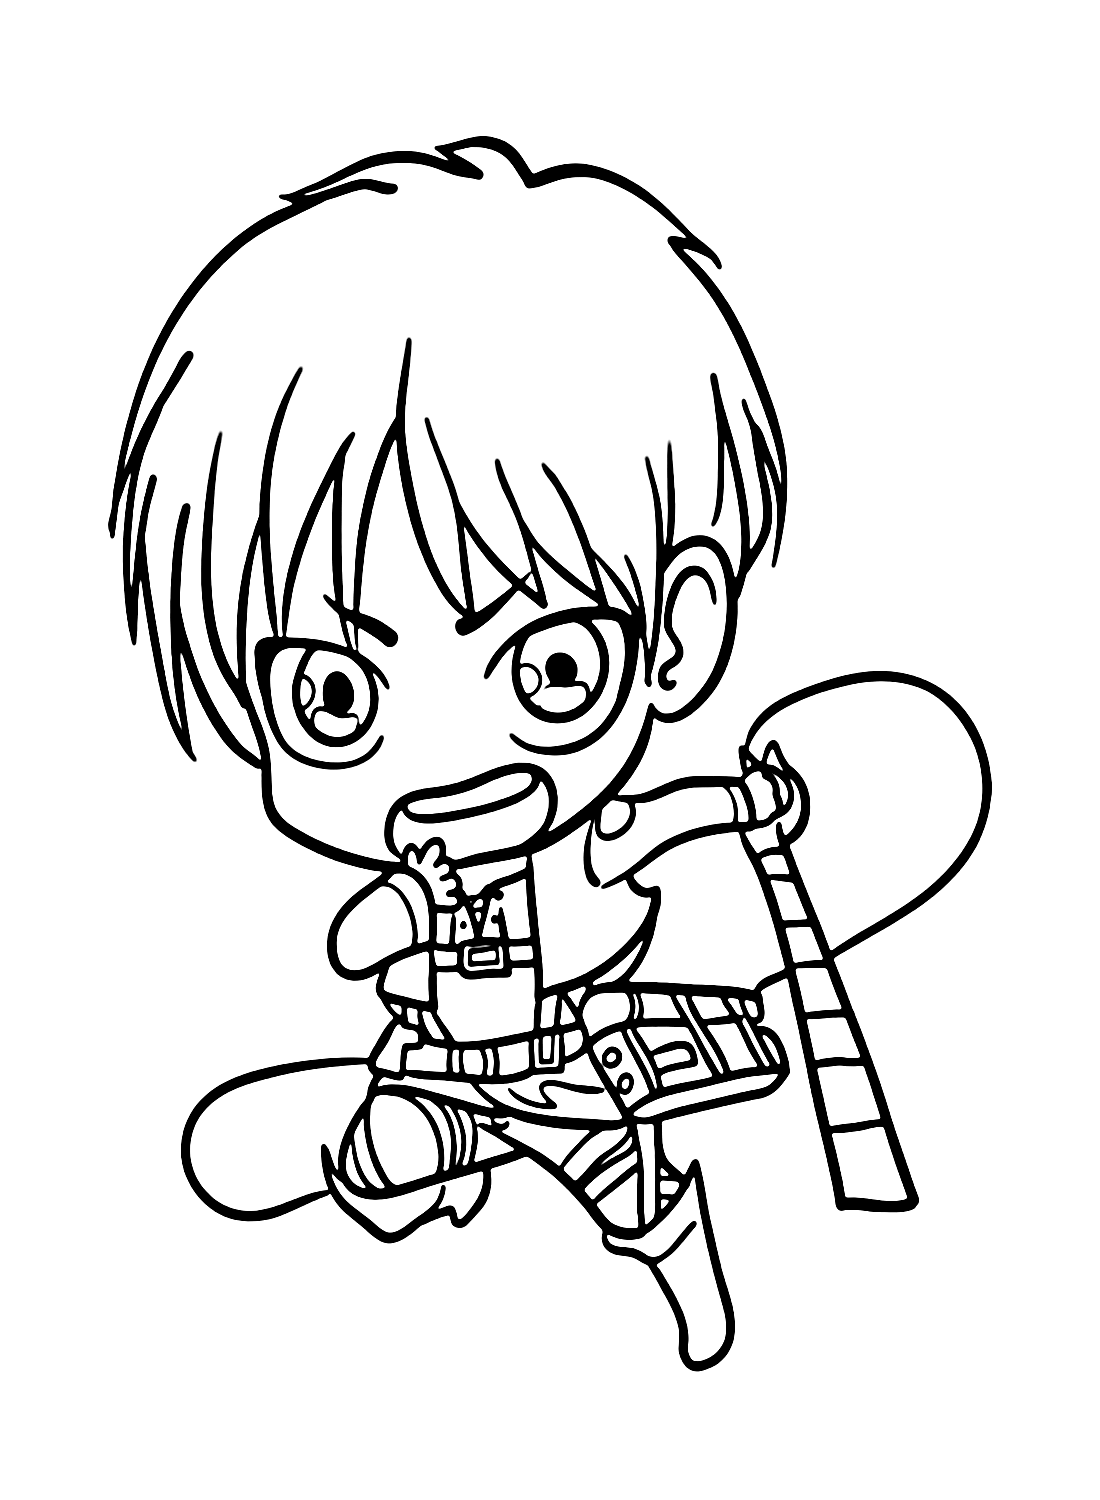 Cute Eren Yeager Coloring Page